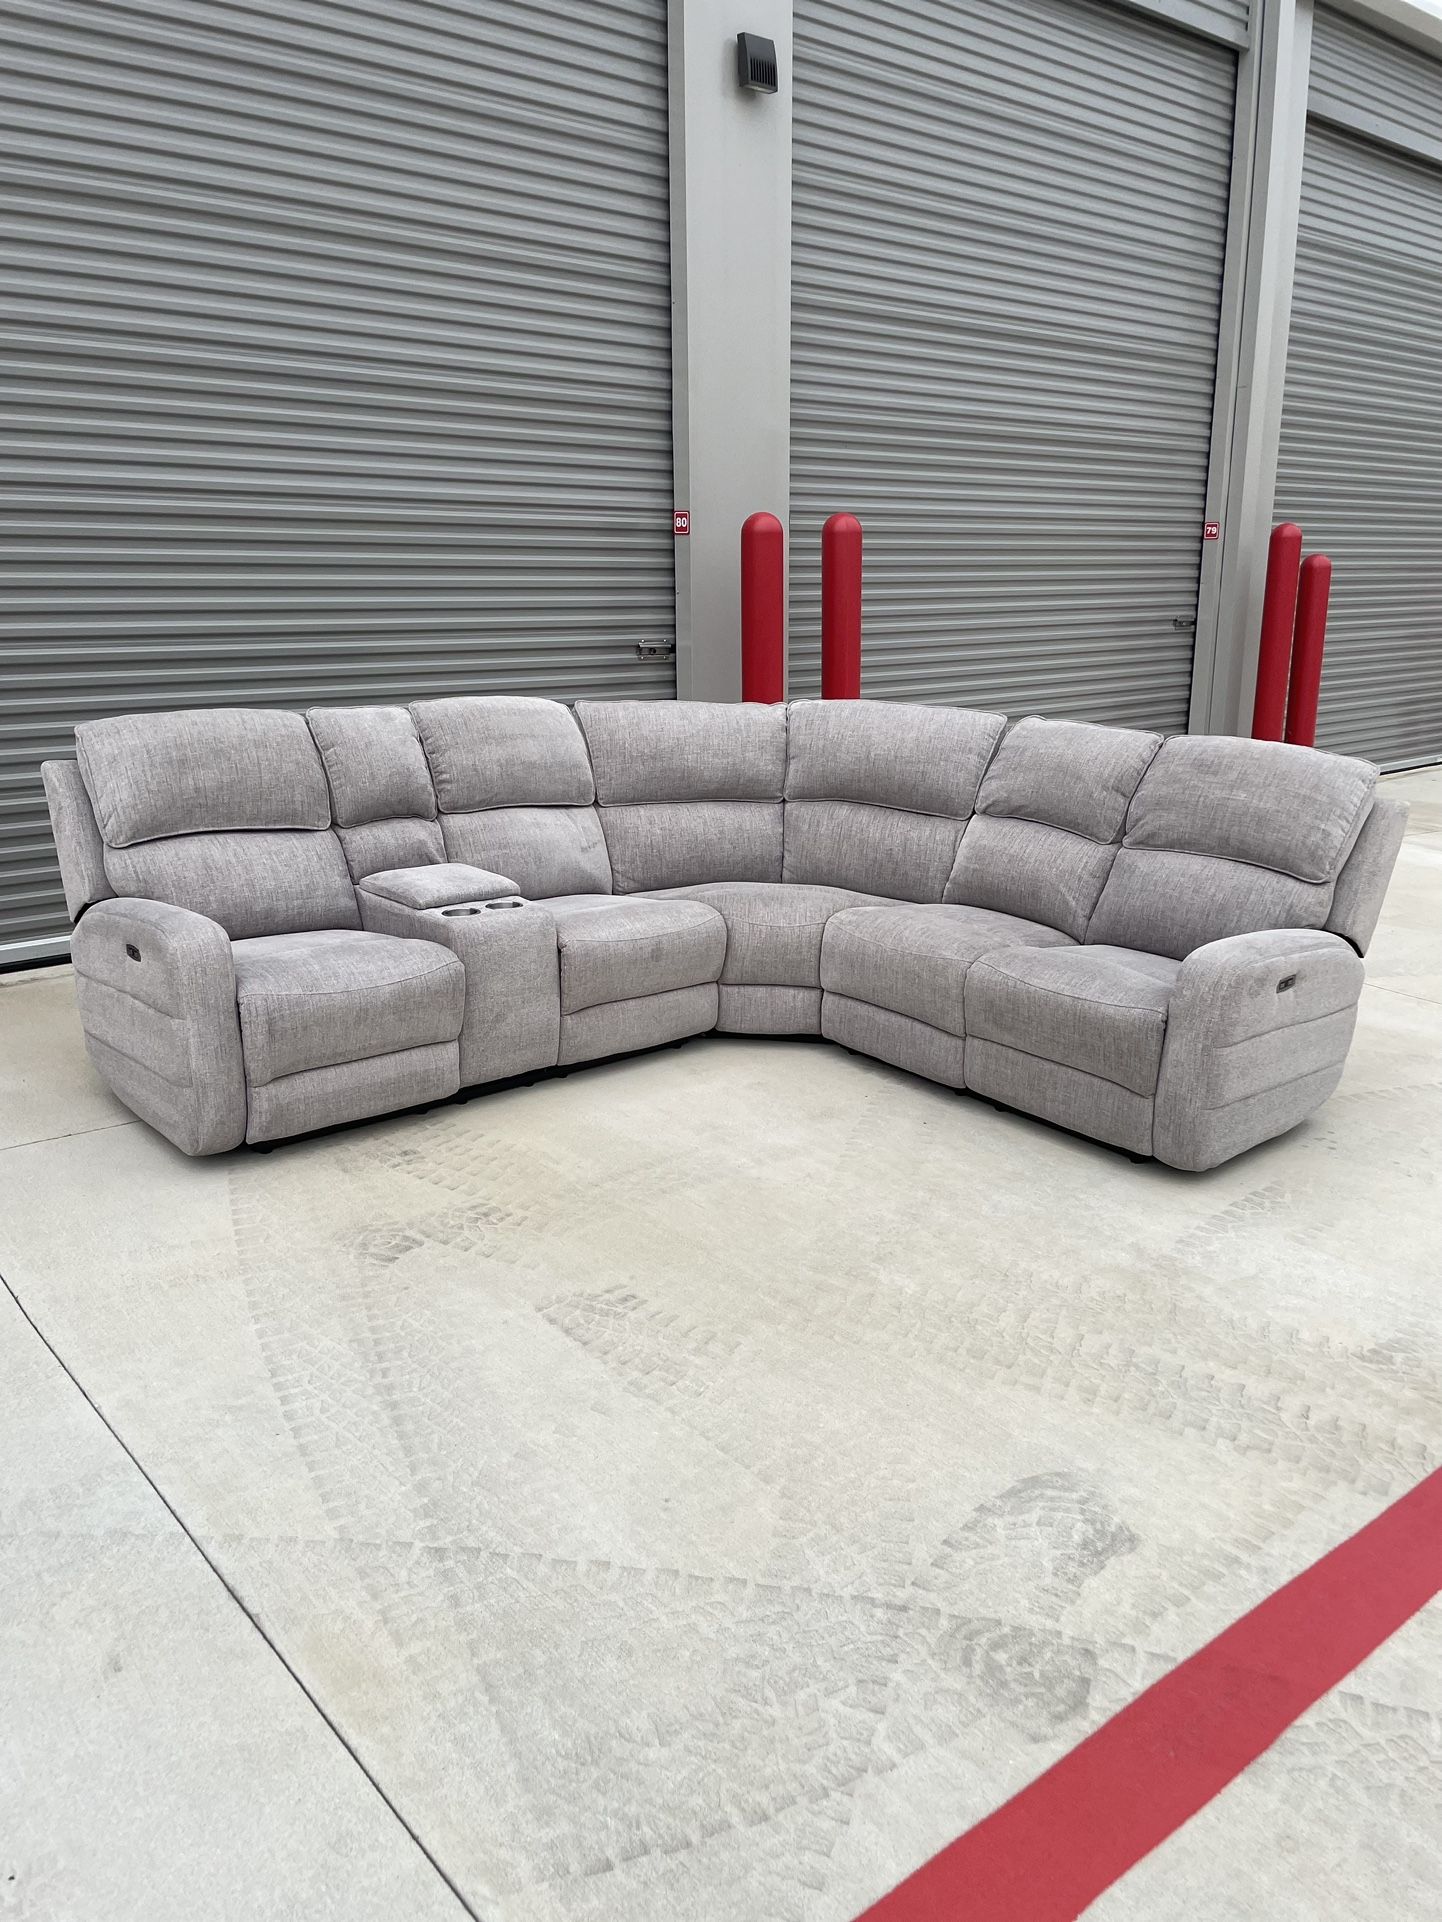 Free Delivery - Light Gray Power Recliner Sectional Sofa Couch